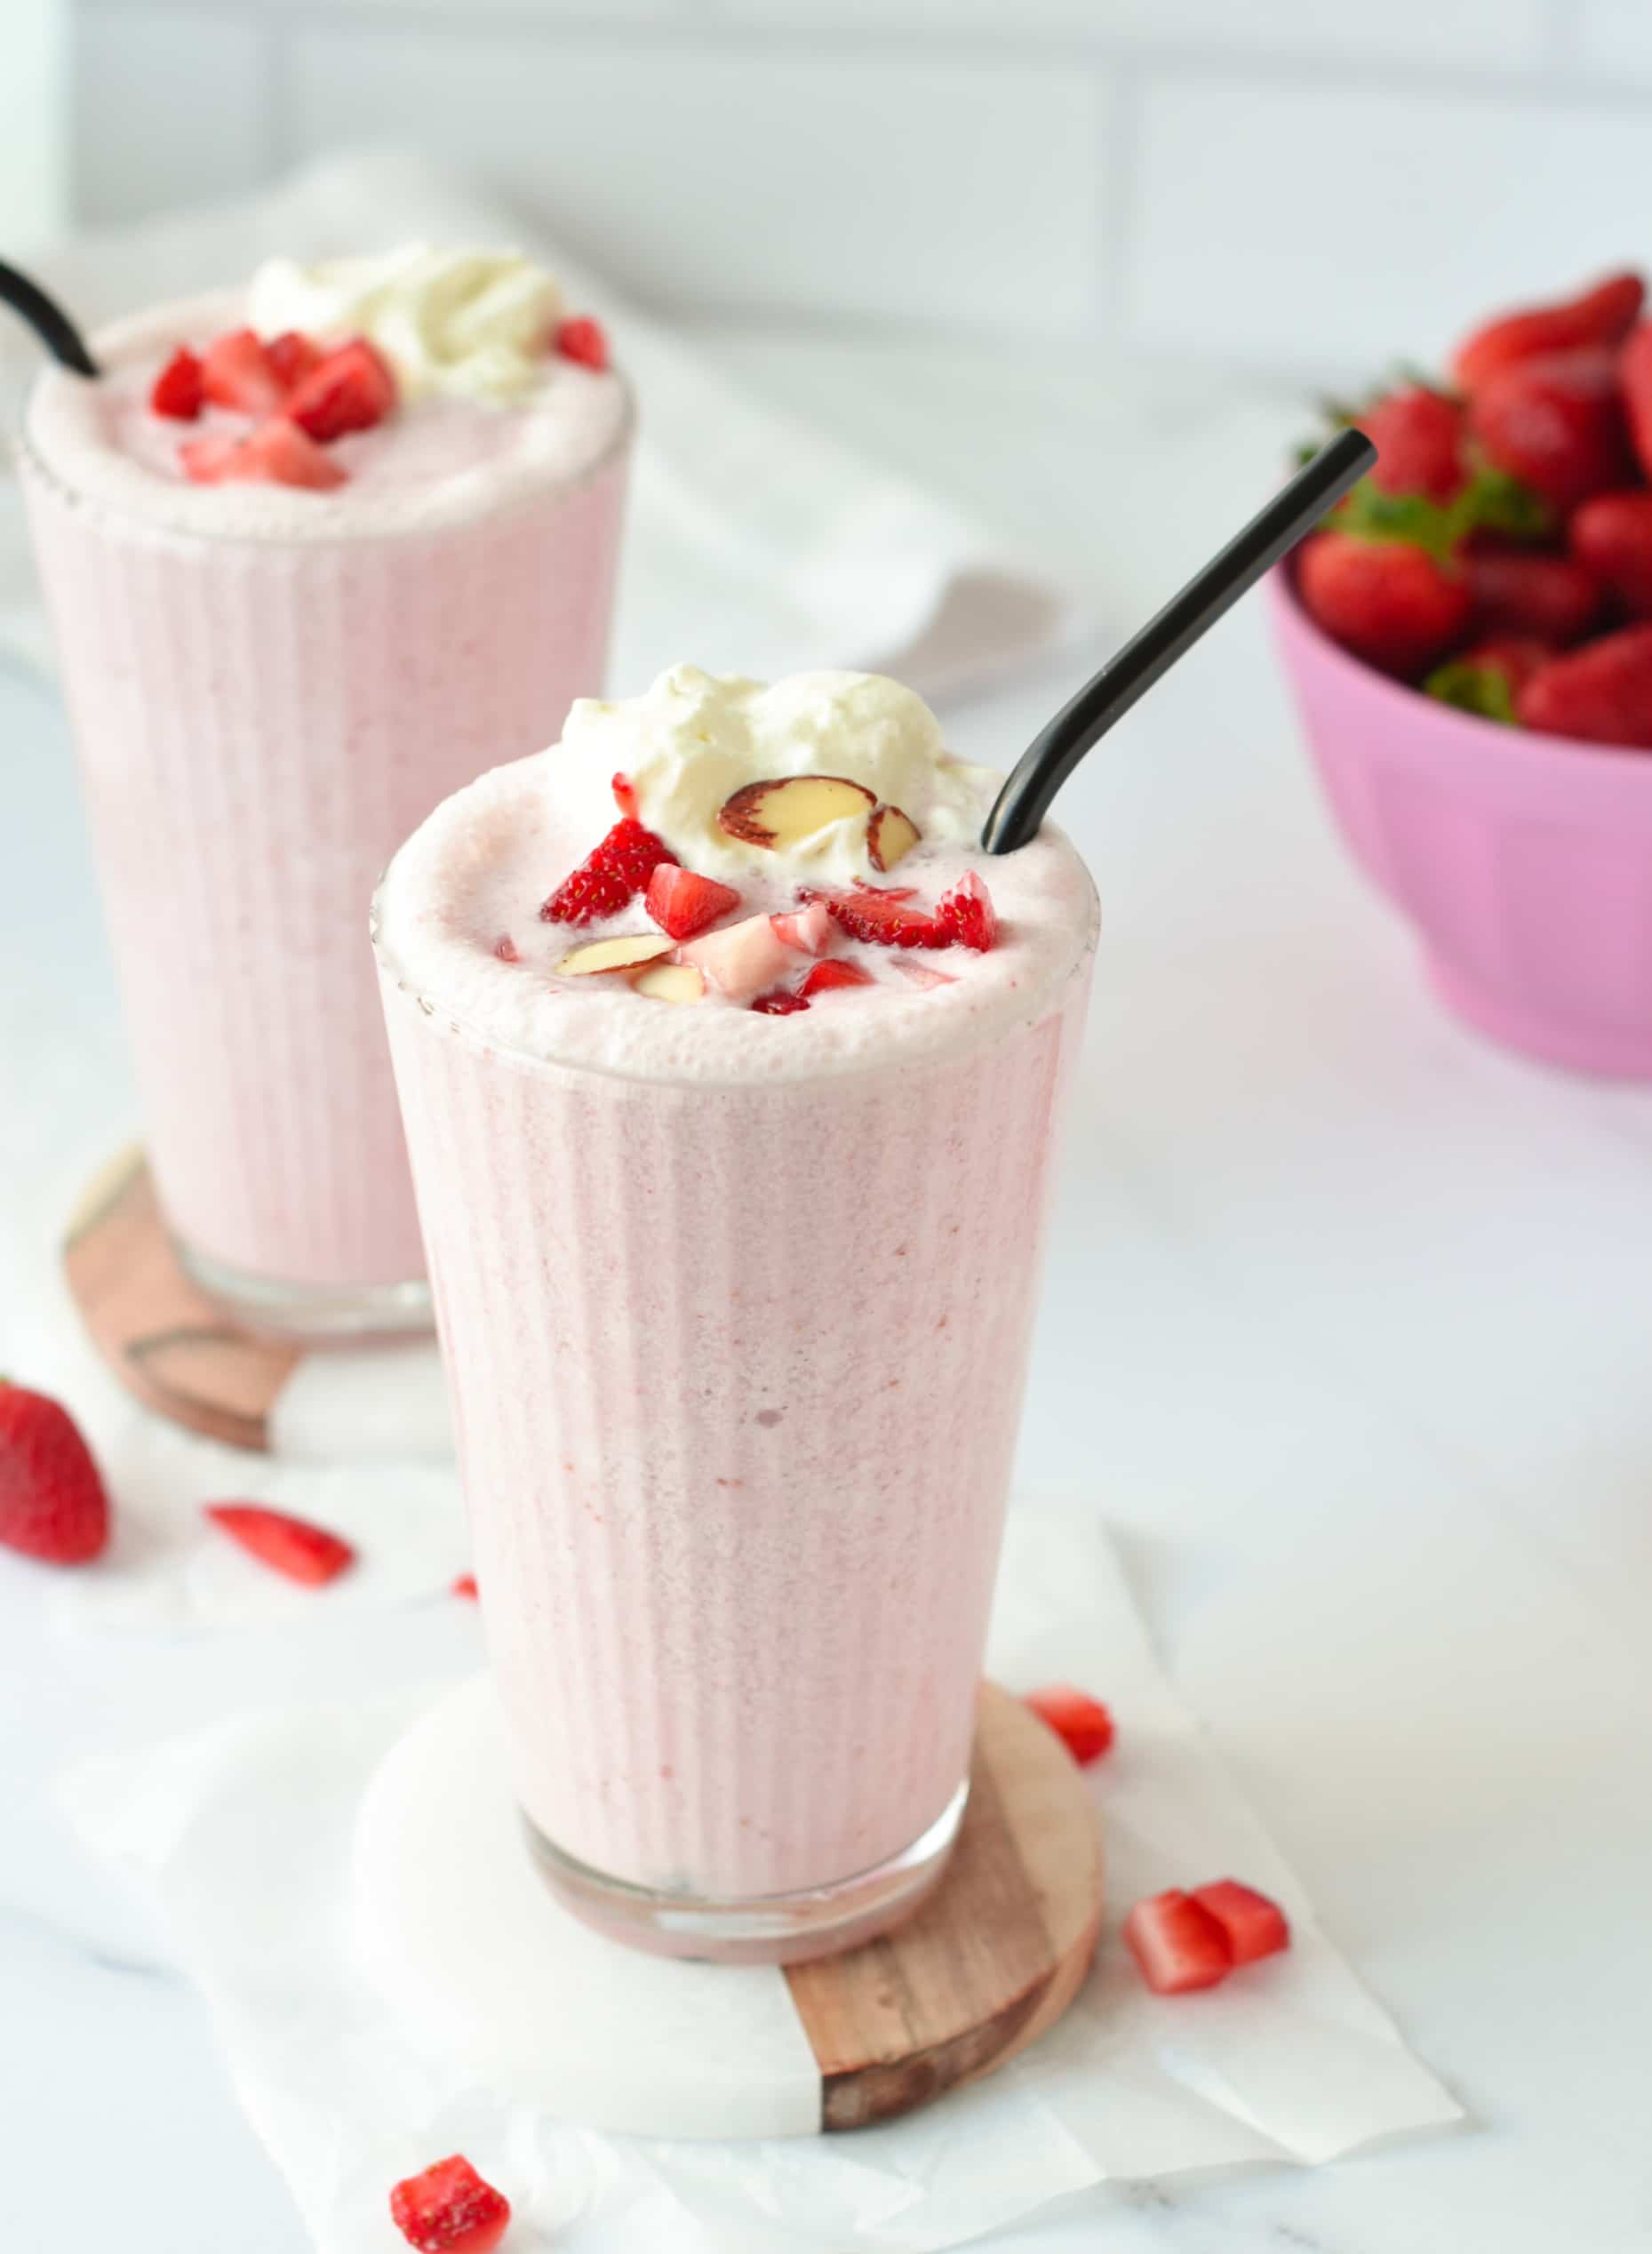 Two Keto Smoothie in tall glasses with black straws,  and decorated with whipped cream, chopped strawberries, and slivered almonds.